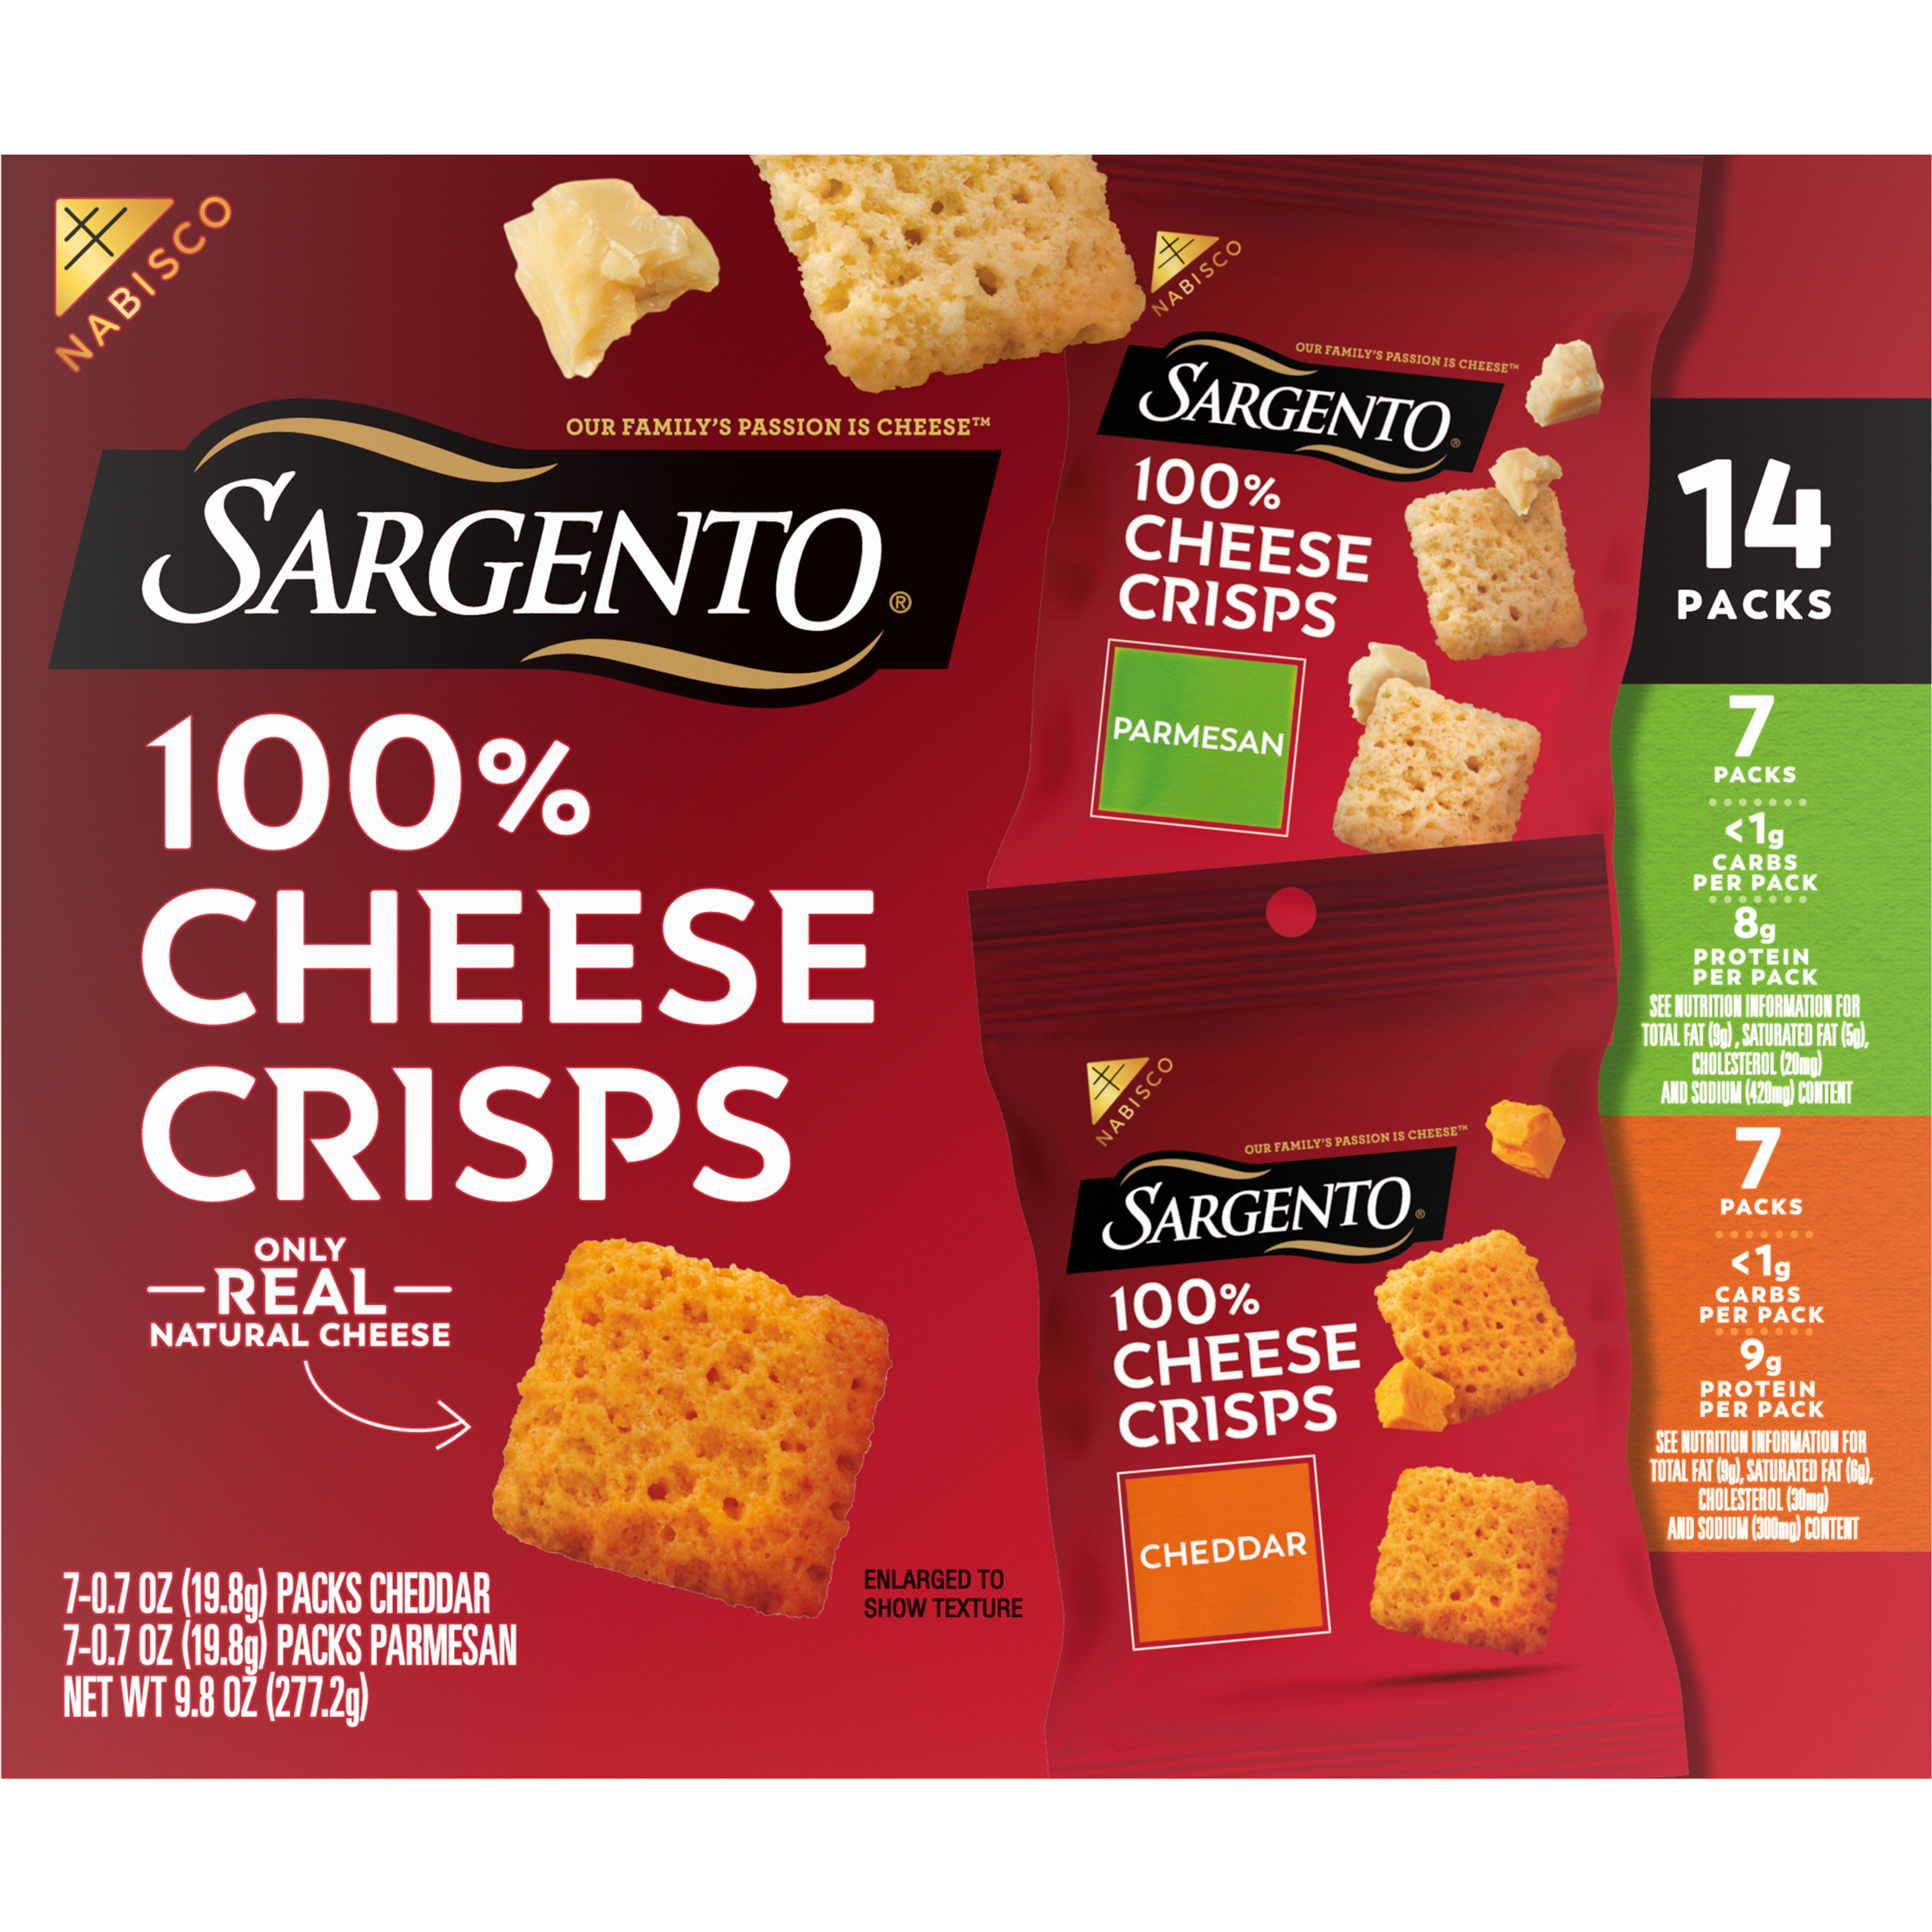 SARGENTO® 100% Cheese Crisps Variety Pack, Parmesan and Cheddar, 14 Snack Packs-1